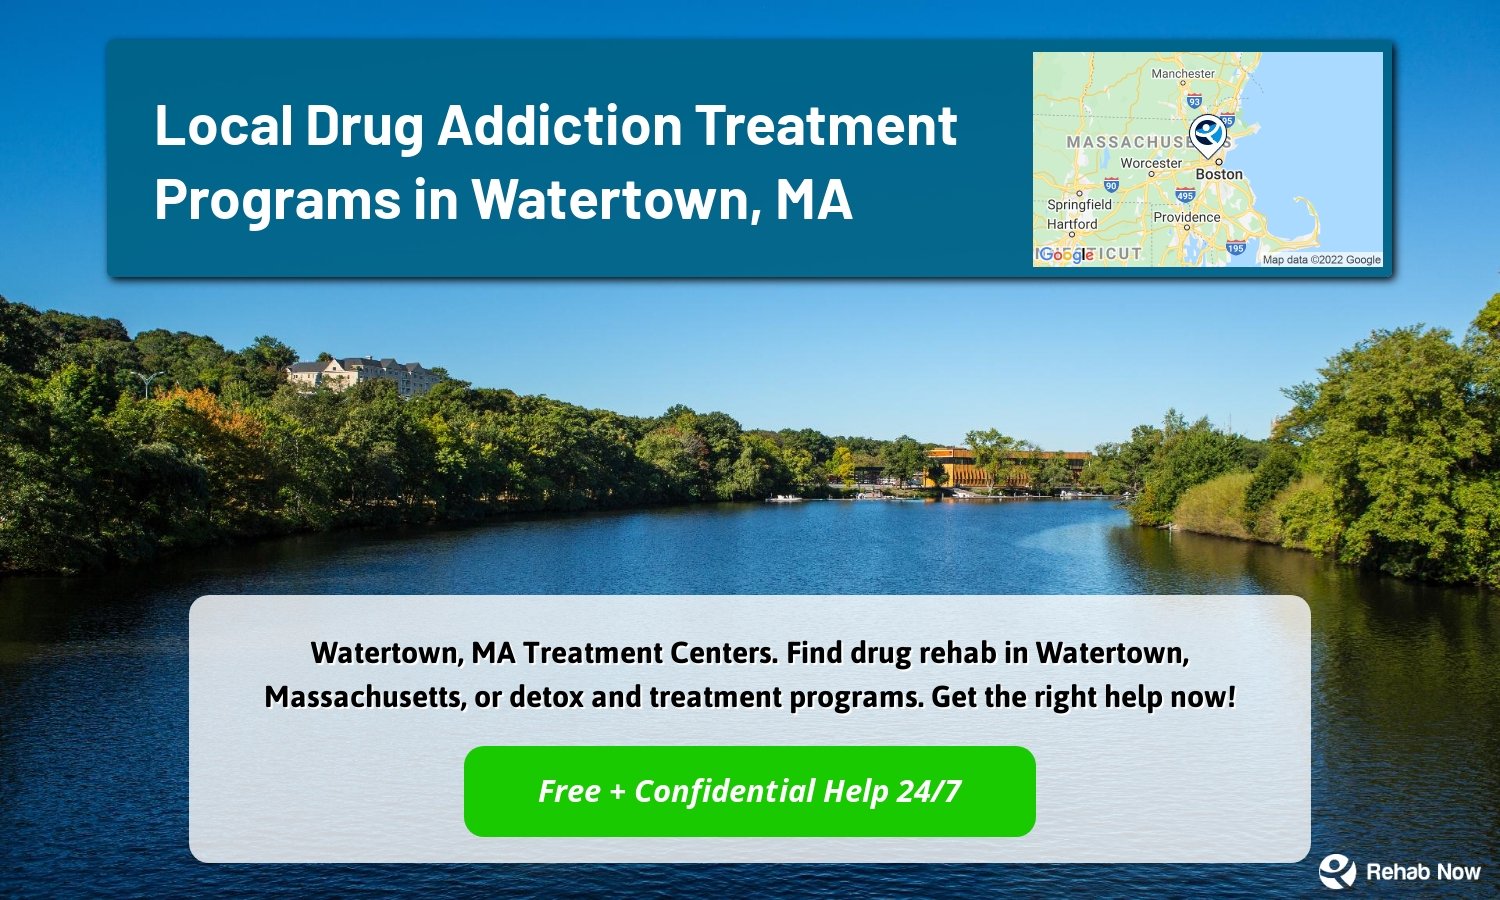 Watertown, MA Treatment Centers. Find drug rehab in Watertown, Massachusetts, or detox and treatment programs. Get the right help now!